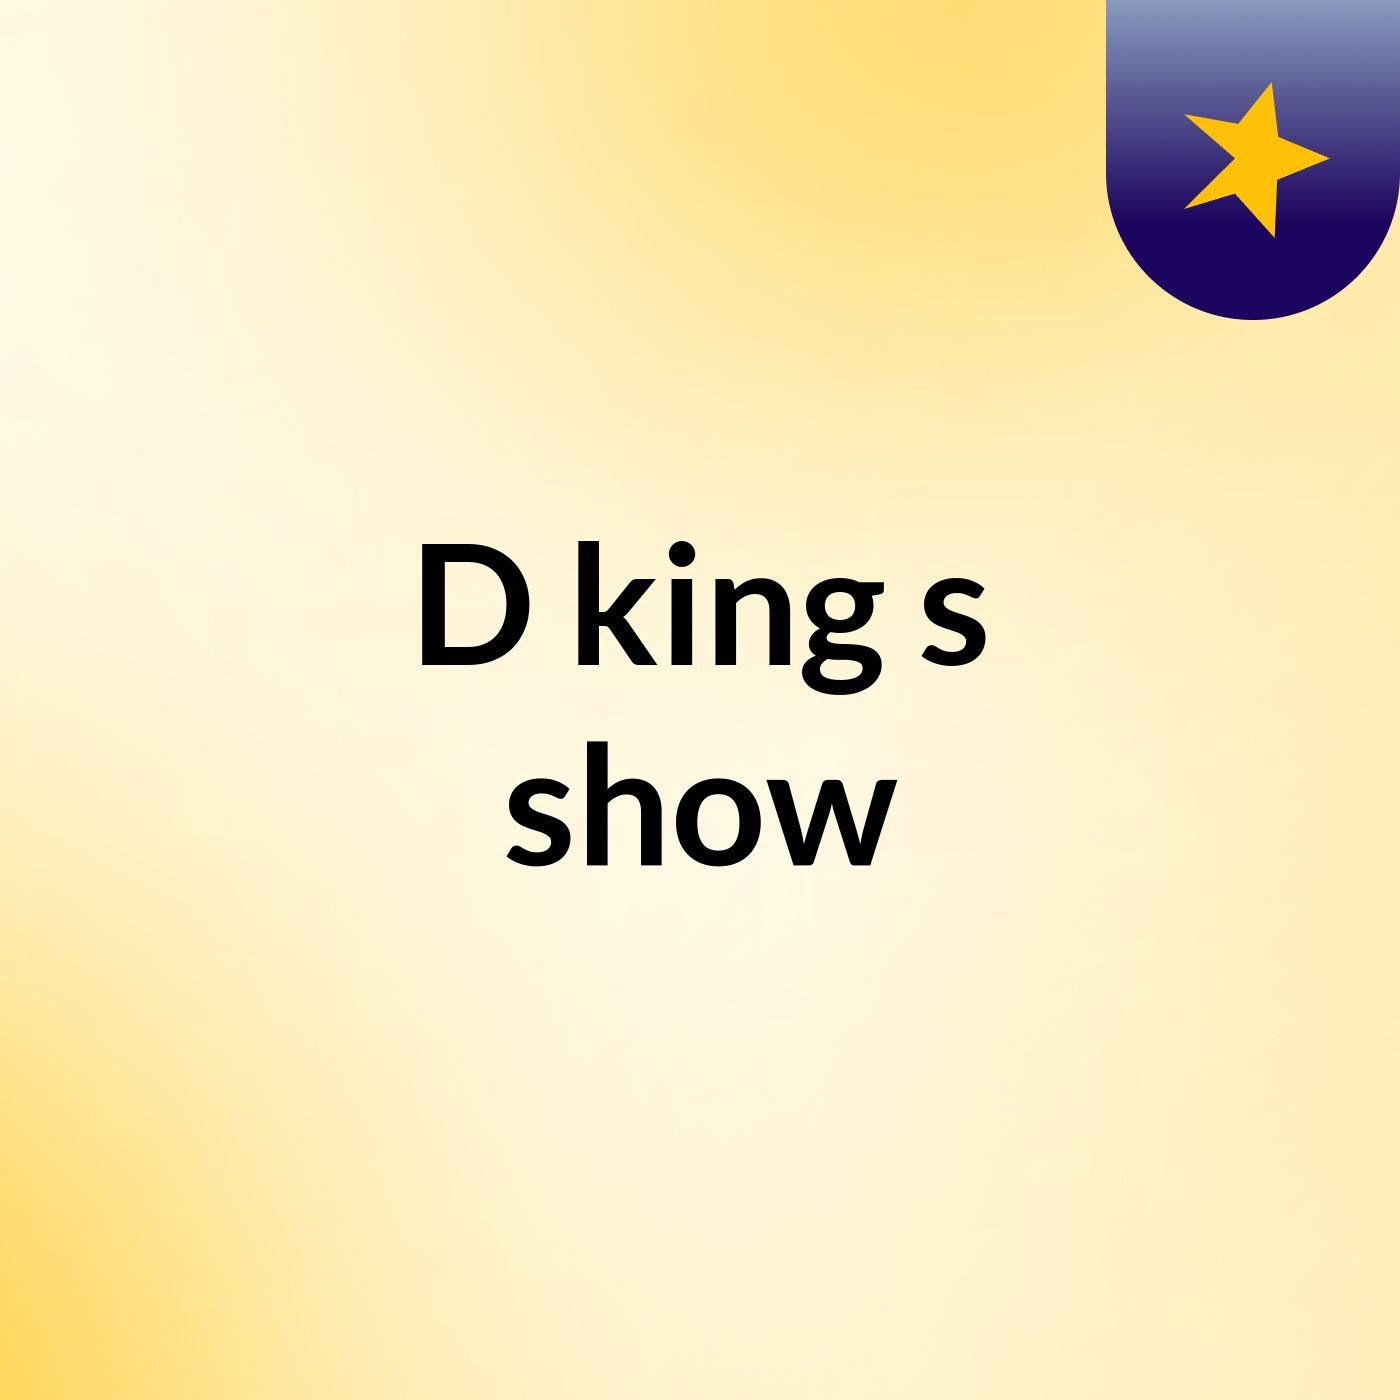 D king's show